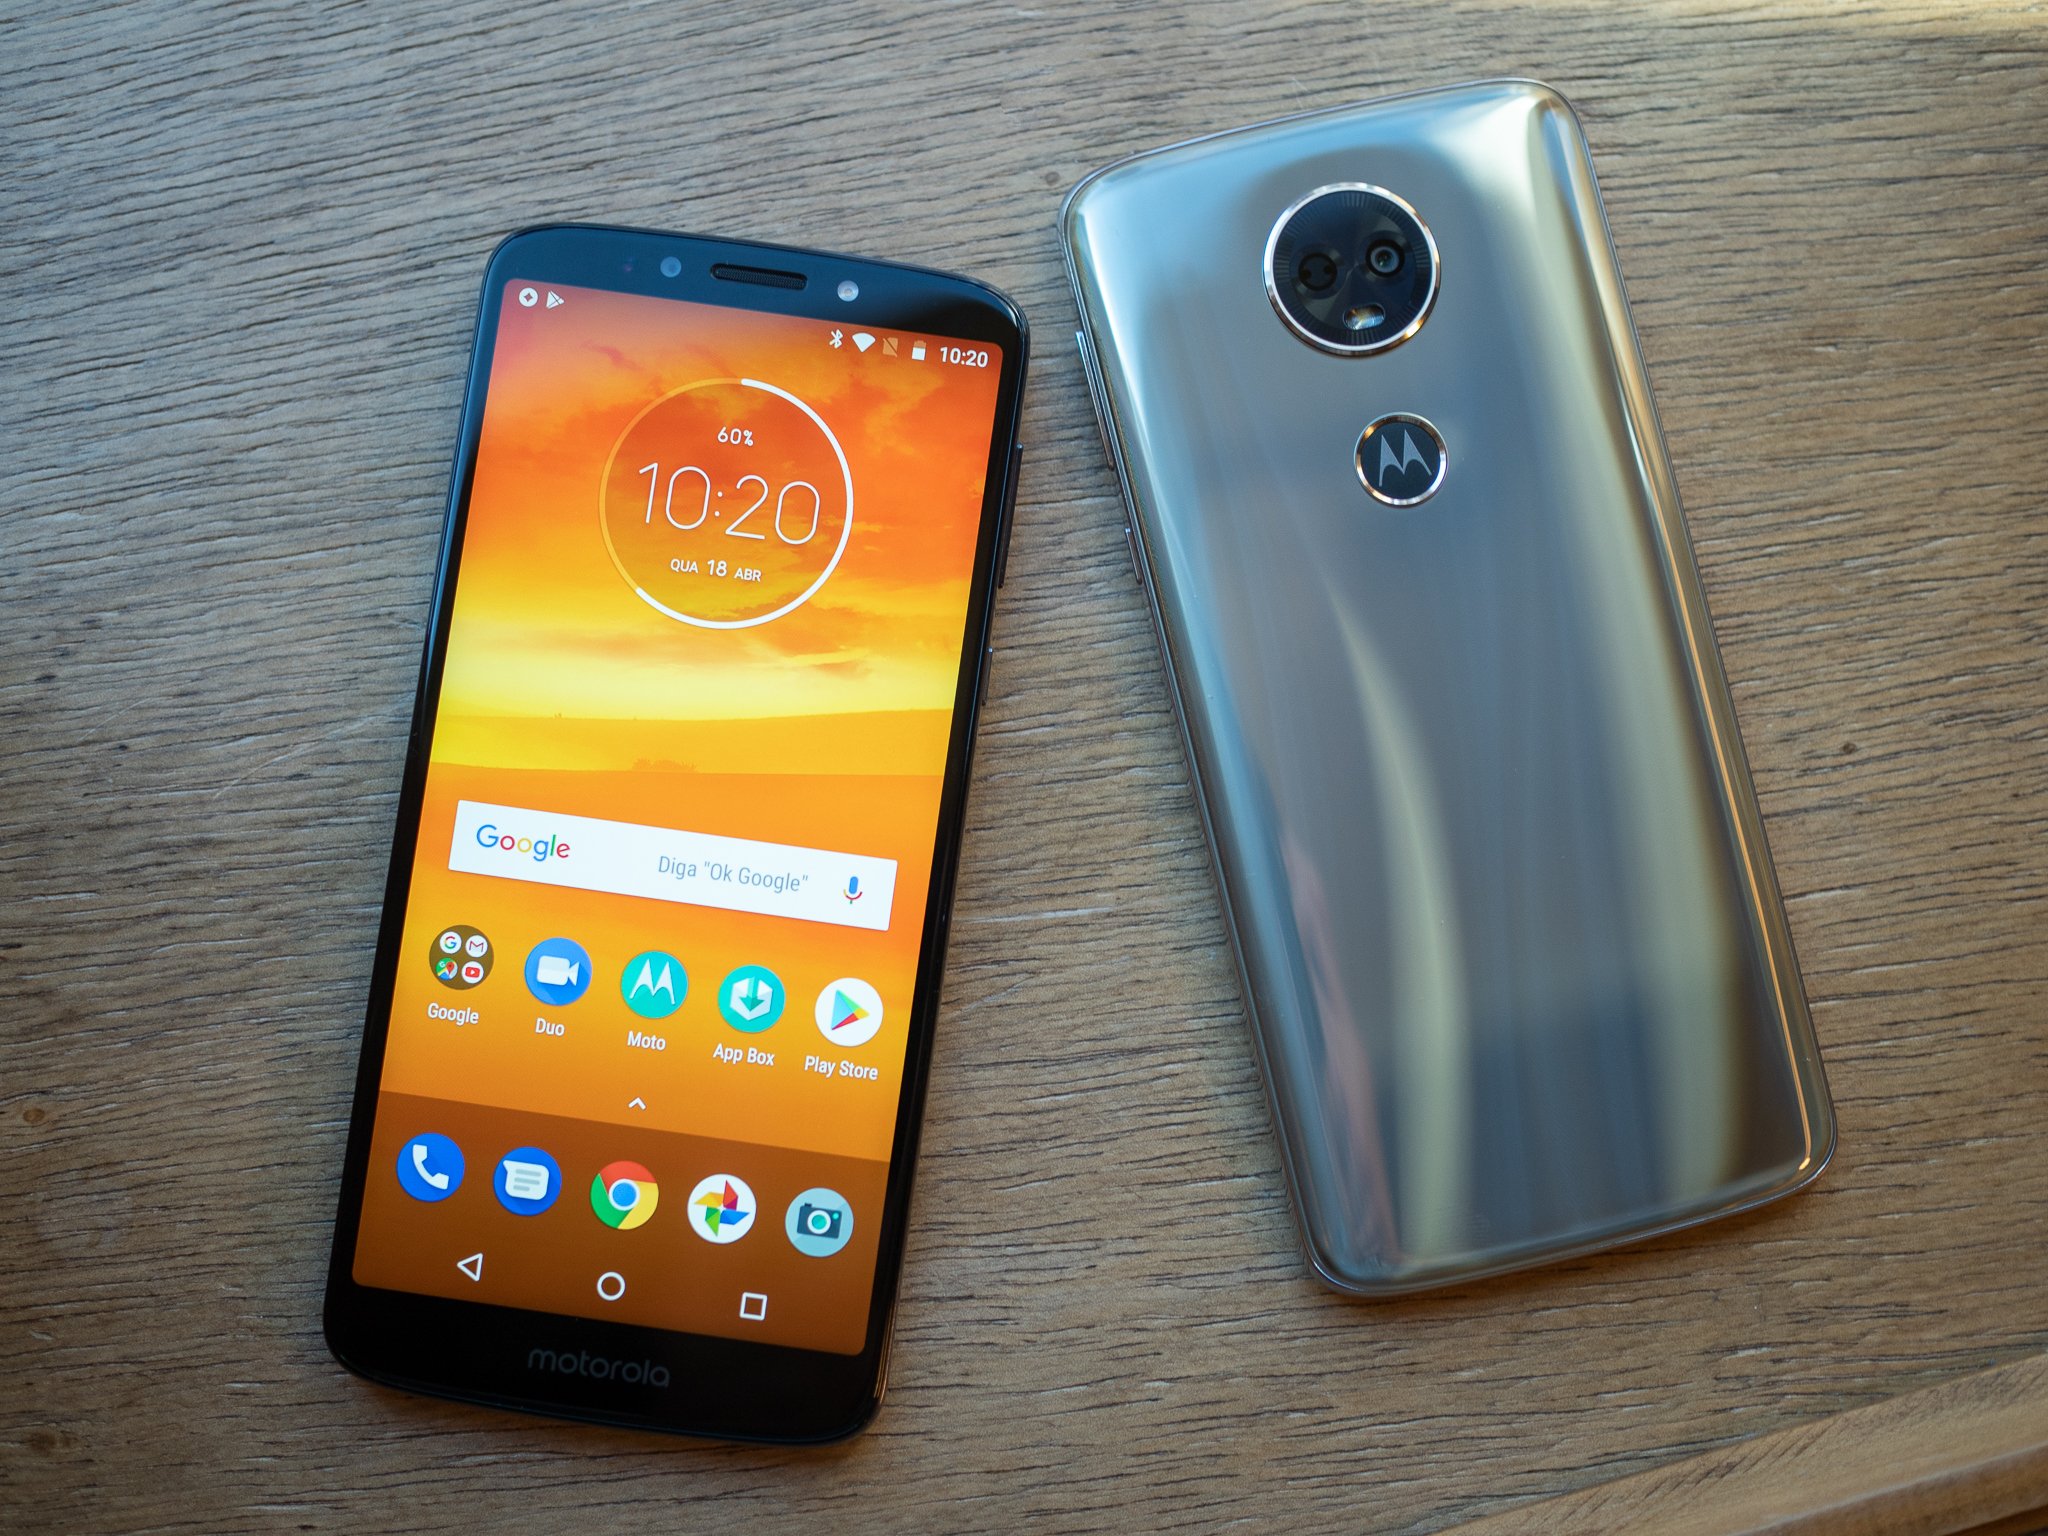 Where to buy the Moto E5 series in the U.S. and Canada